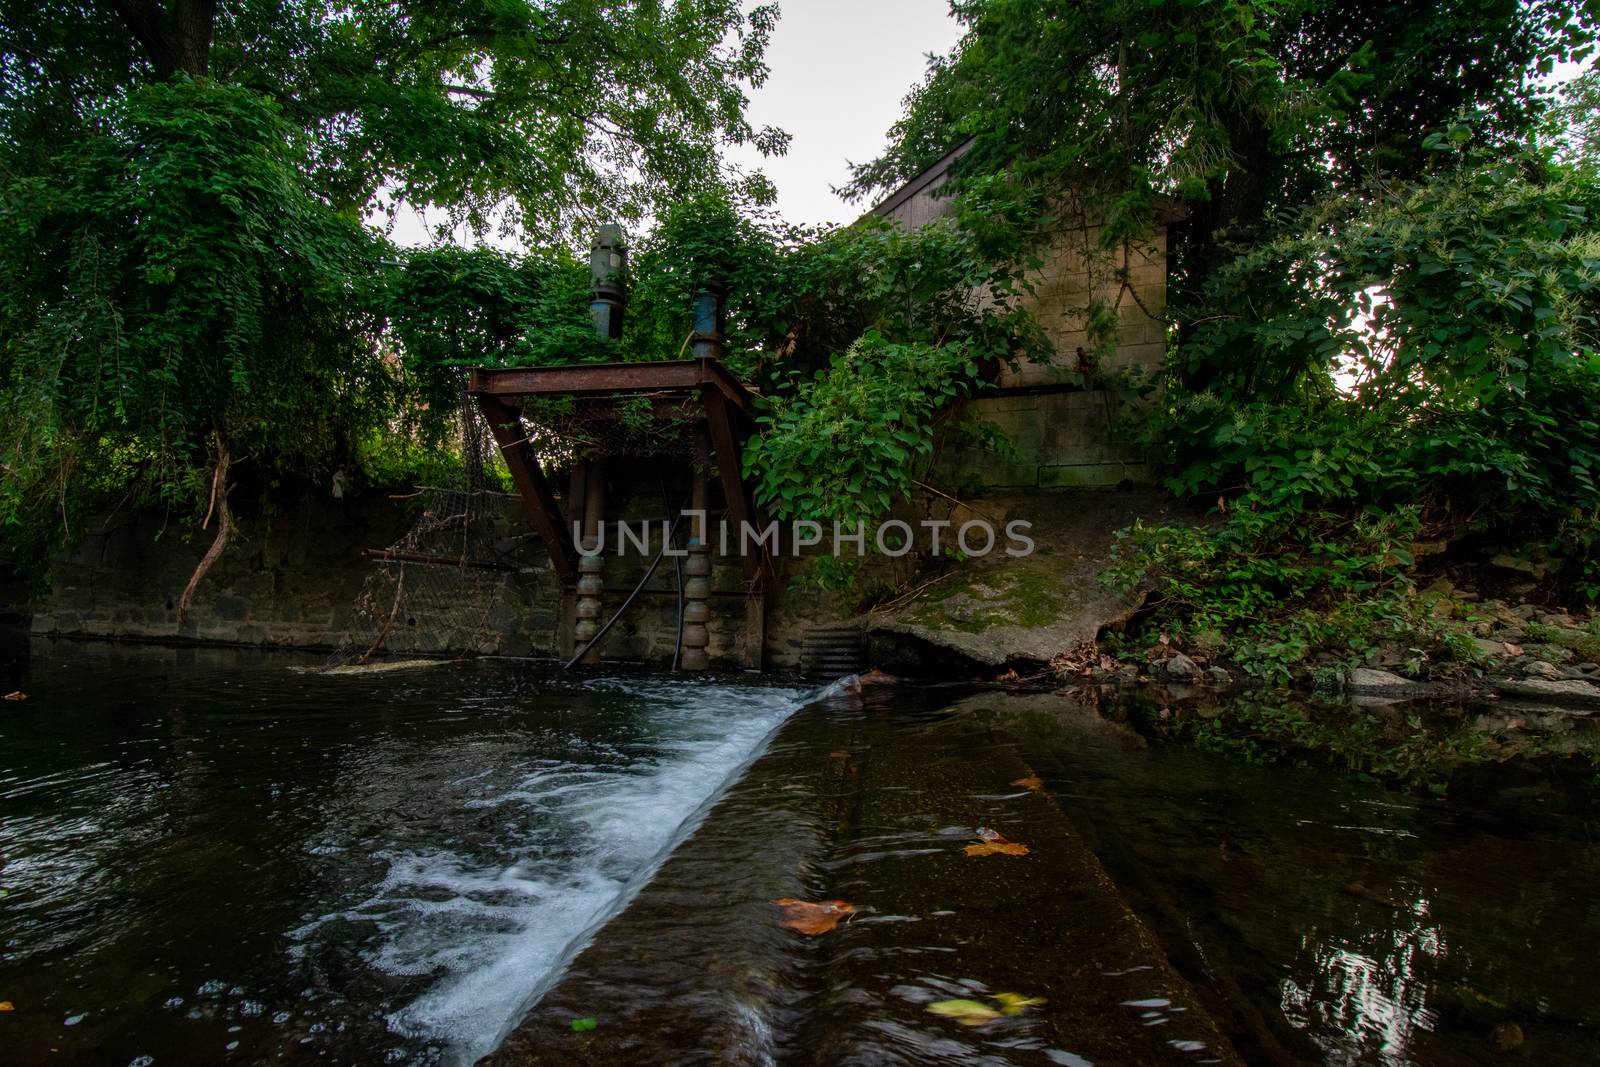 A Small Abandoned Dam in a Creek in Elkins Park, Pennsylvania by bju12290